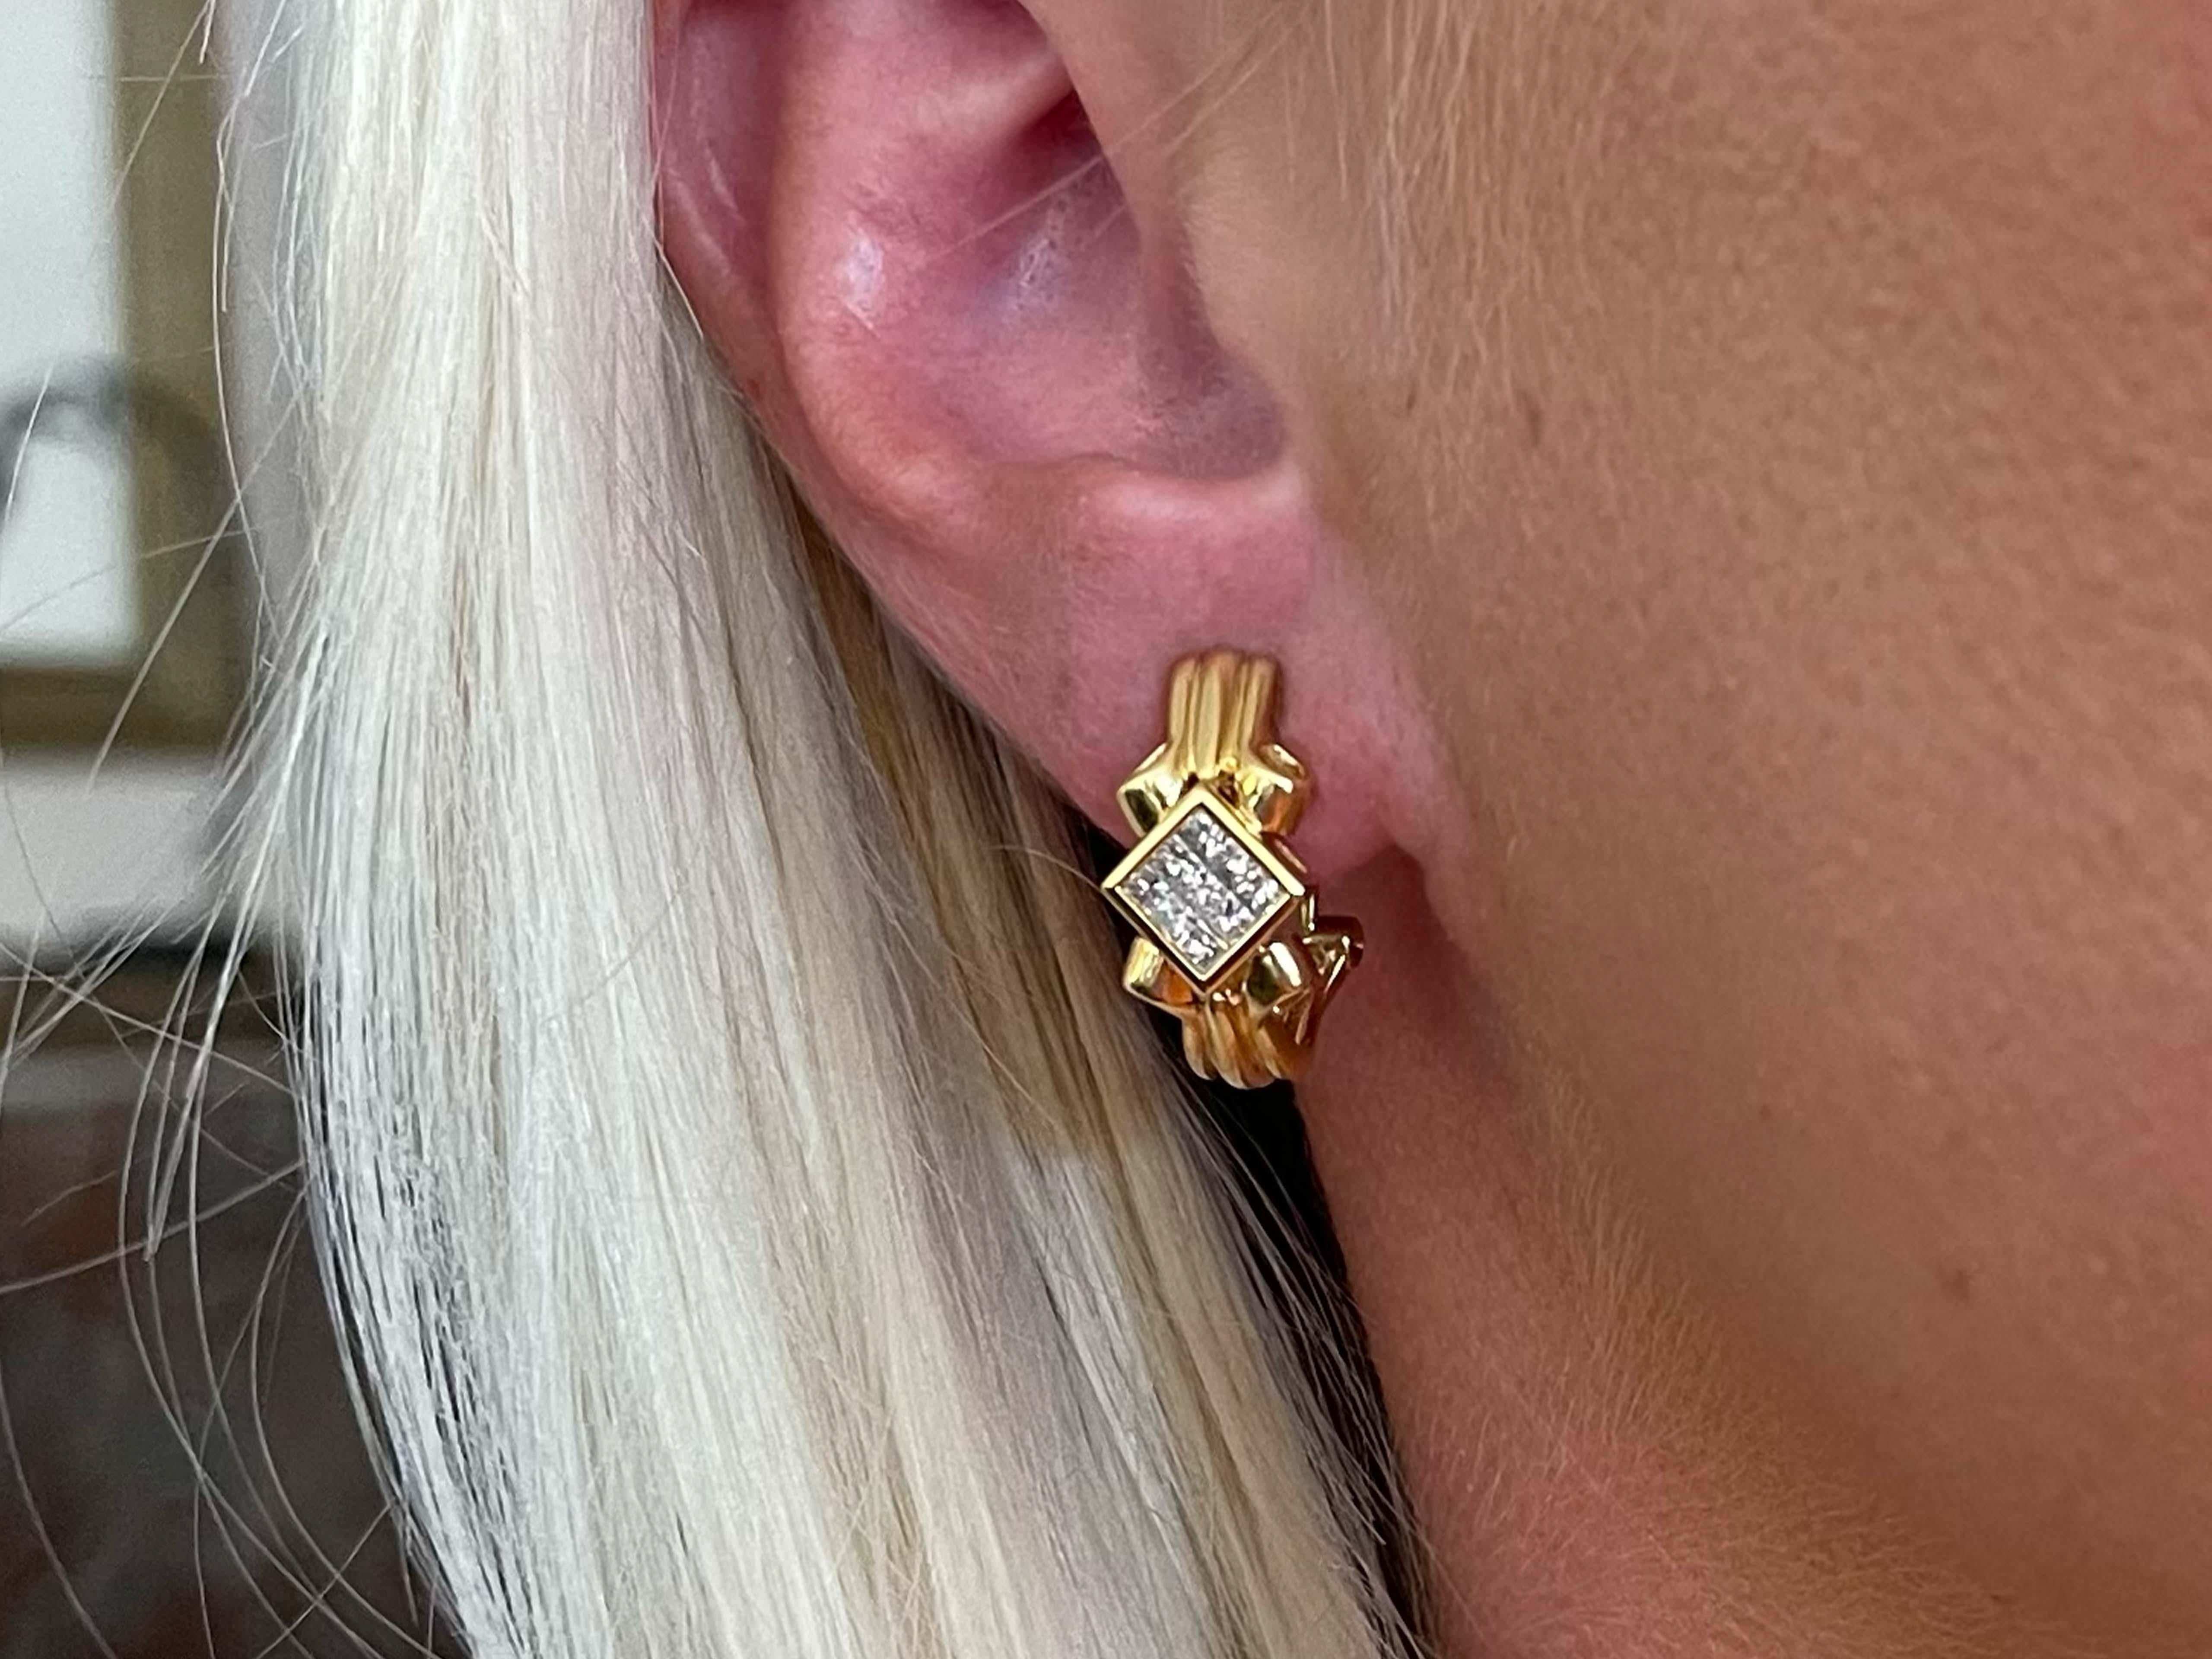 Earrings Specifications:

Metal: 18k Yellow Gold

Earring Measurements: 20.8 x 9.7mm

Total Weight: 9 Grams

Diamonds: 18

Setting: Invisible set

Diamond Color: G

Diamond Clarity: VS2-SI1

Diamond Carat Weight: 0.50 carats

Stamped: